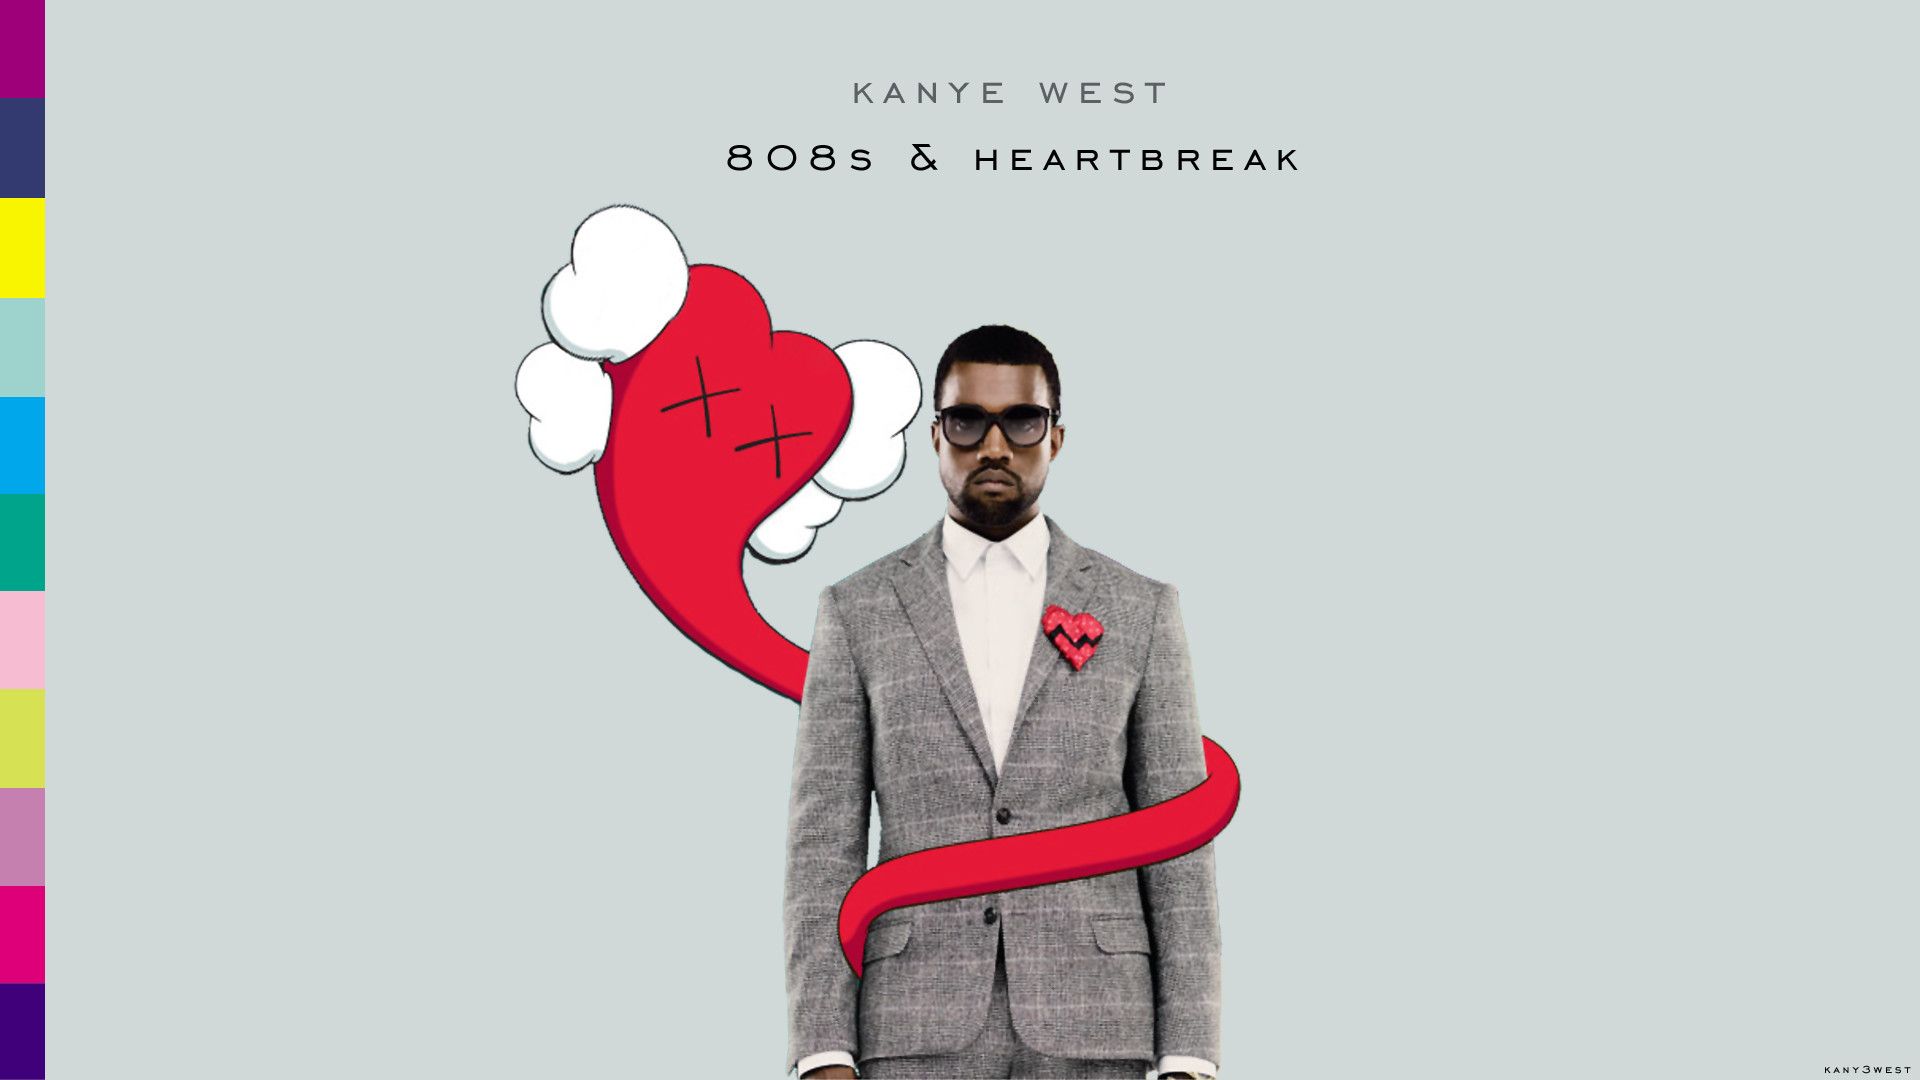 kanye west 808s and heartbreak free download